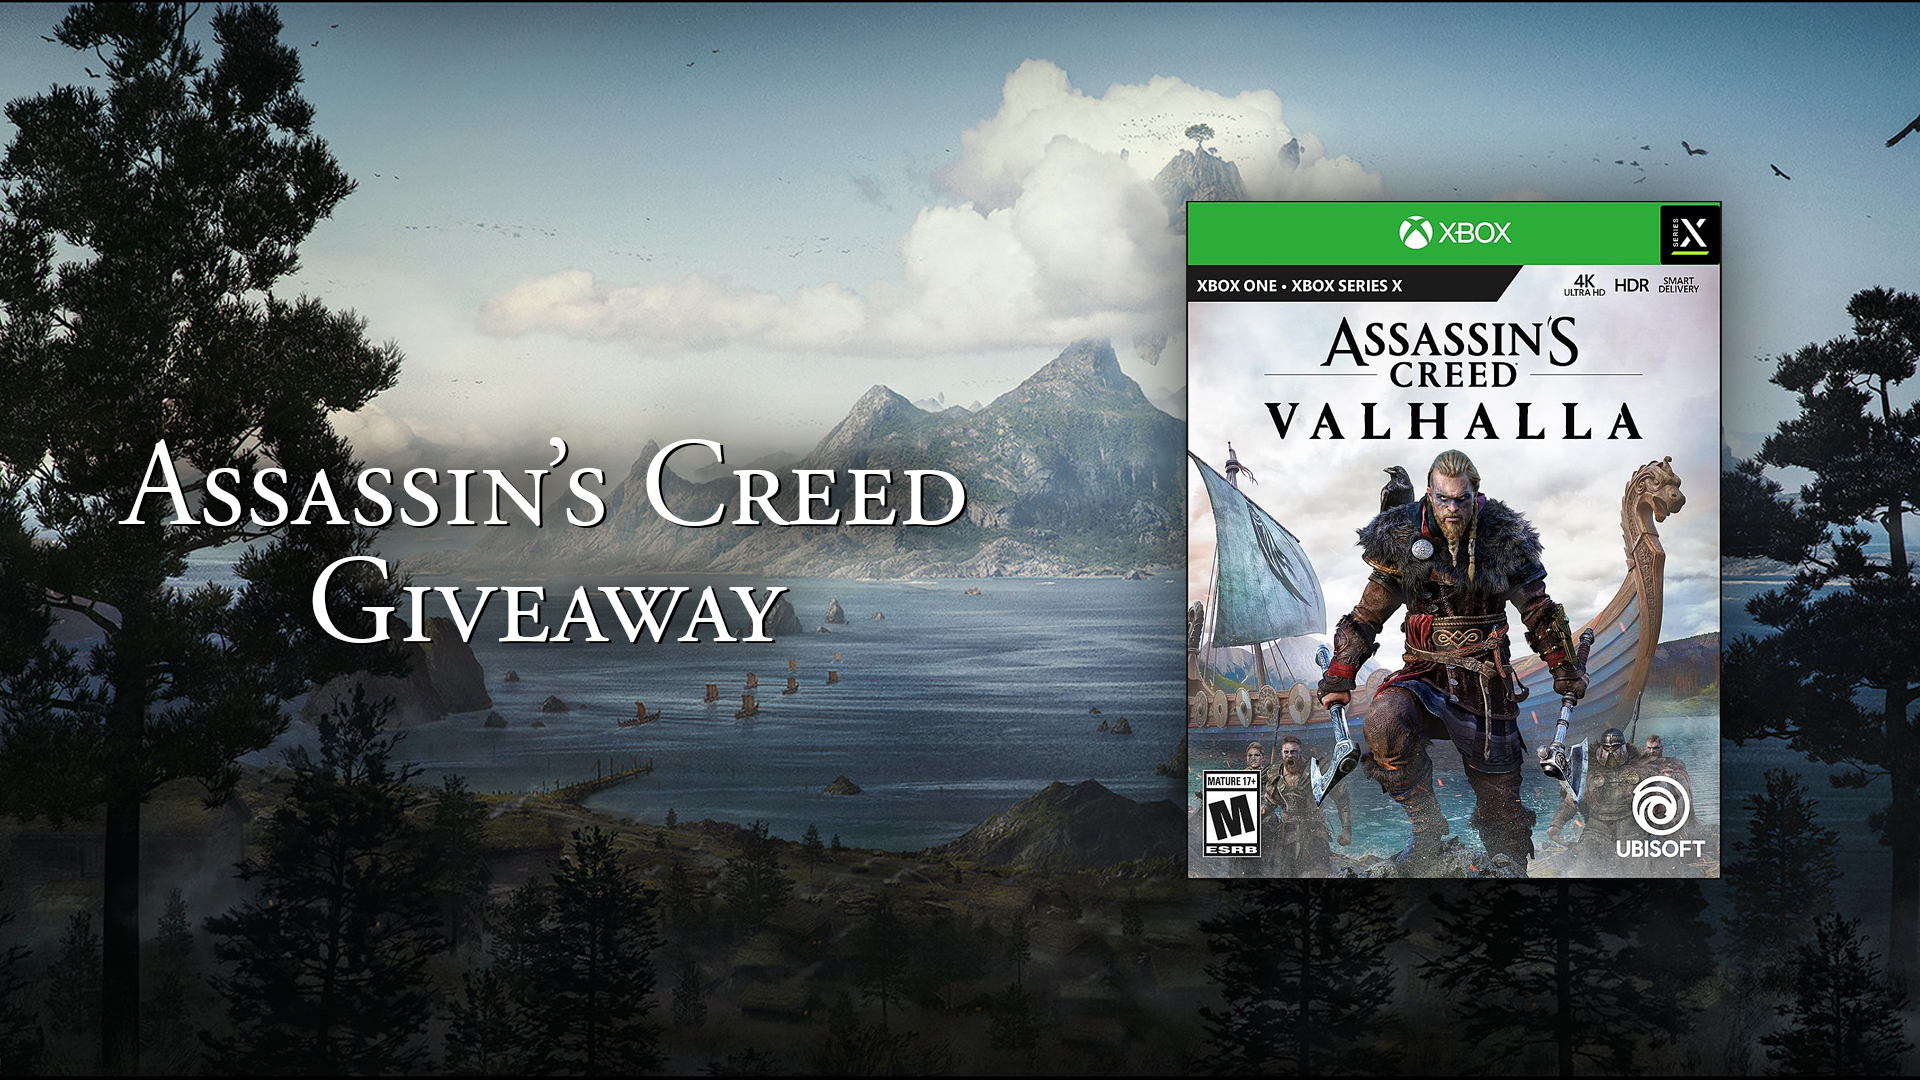 Assassin's Creed Valhalla giveaway